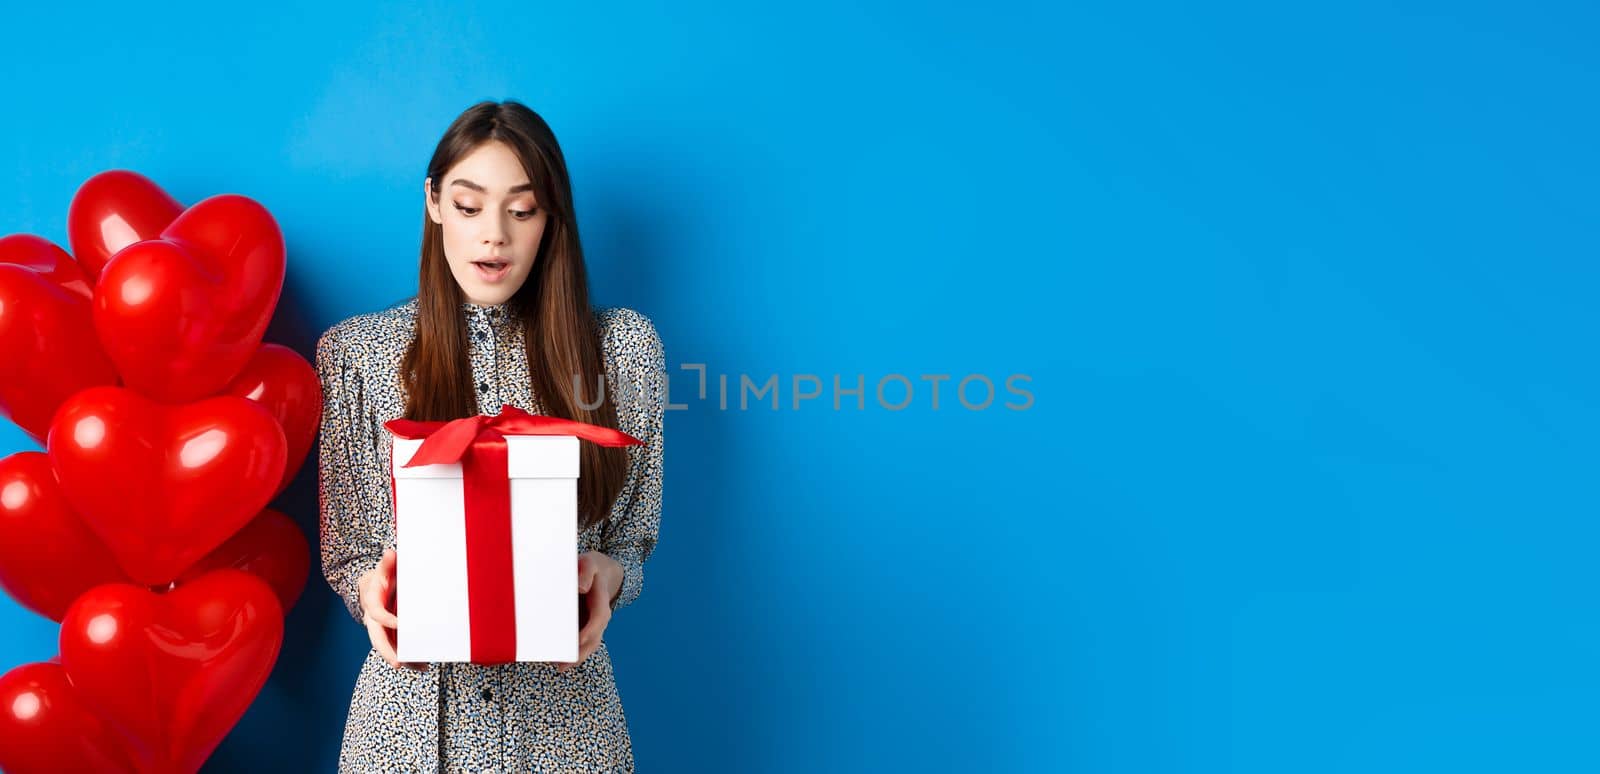 Valentines day. Image of beautiful girl looking surprised at gift box, receive present from lover, standing in dress on blue background.